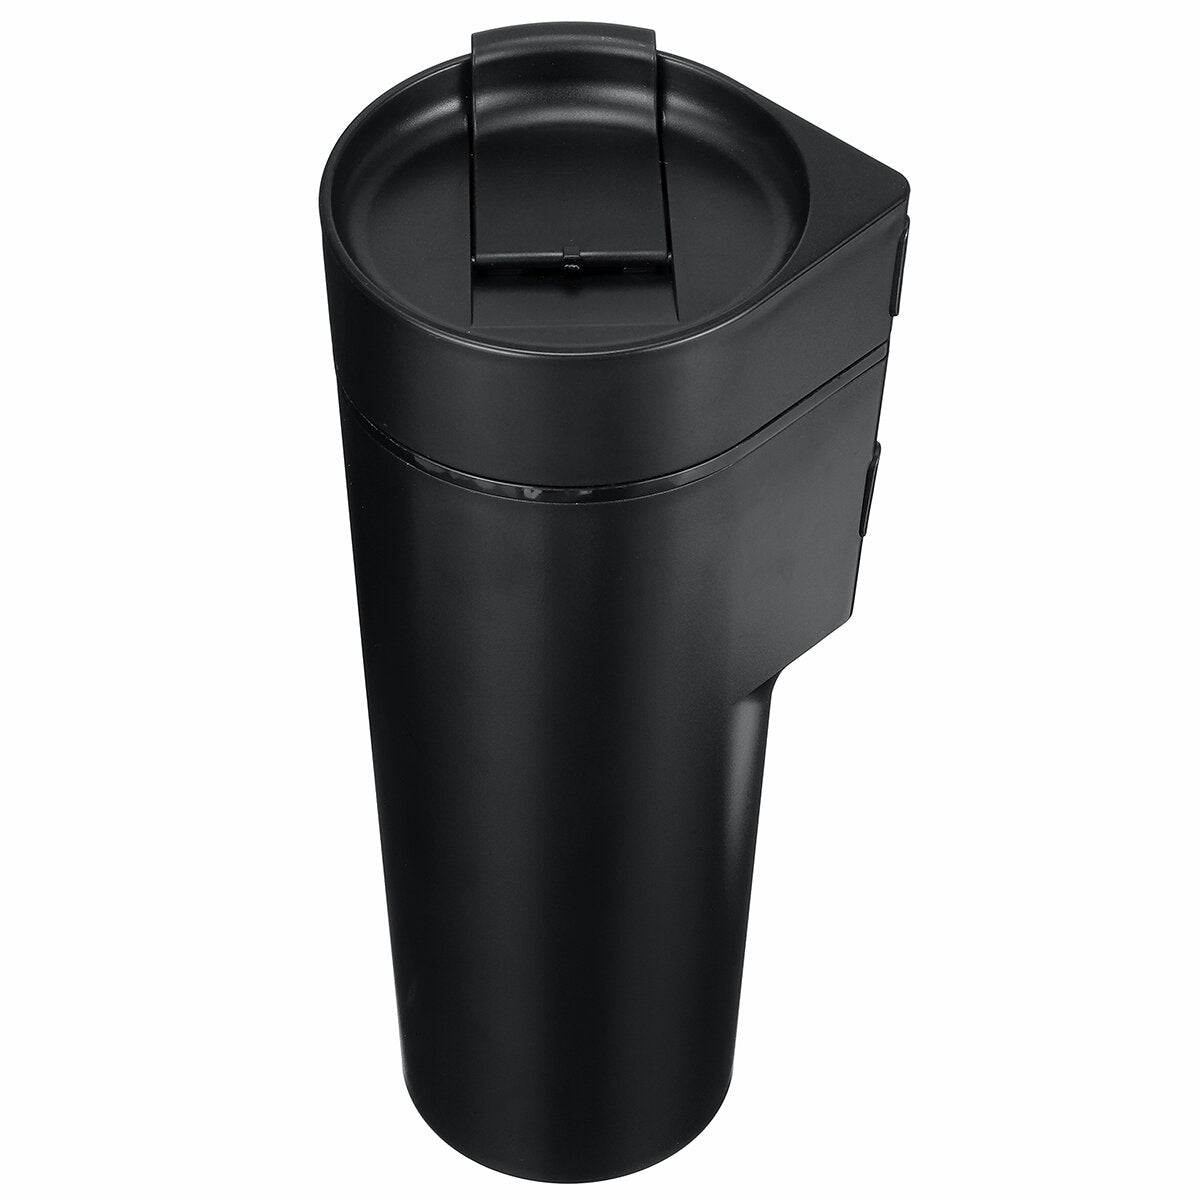 100W 8 OZ Car Coffee Maker Cup Machine Portable Handheld Espresso Capsule Bottle For Camping Travel